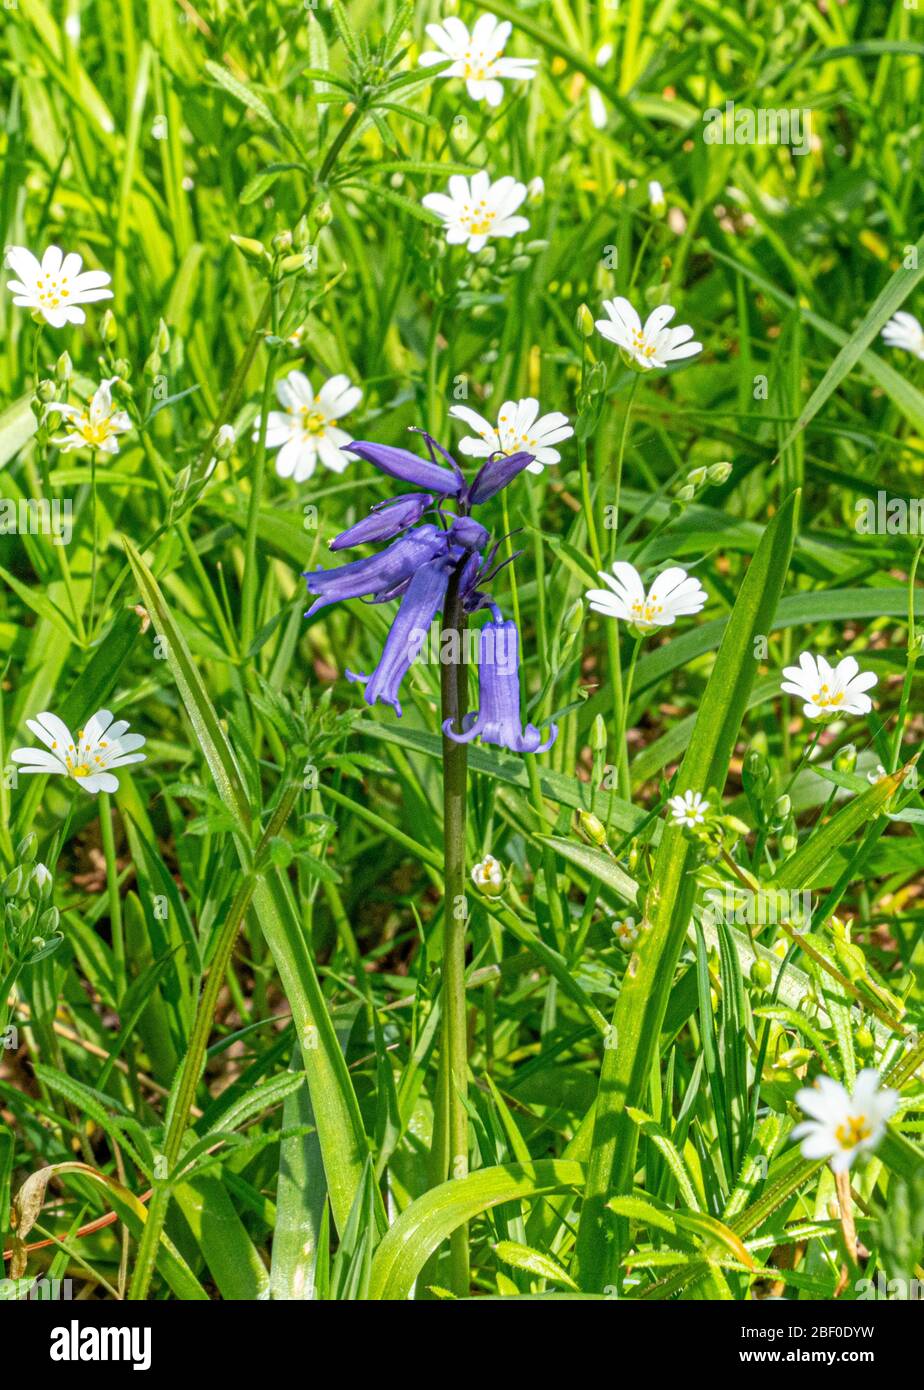 Single Bluebell Images of First week of Bluebells in Bluebell wood springtime in Hertfordshire April 2020. Showing blue flower on green and forest flo Stock Photo